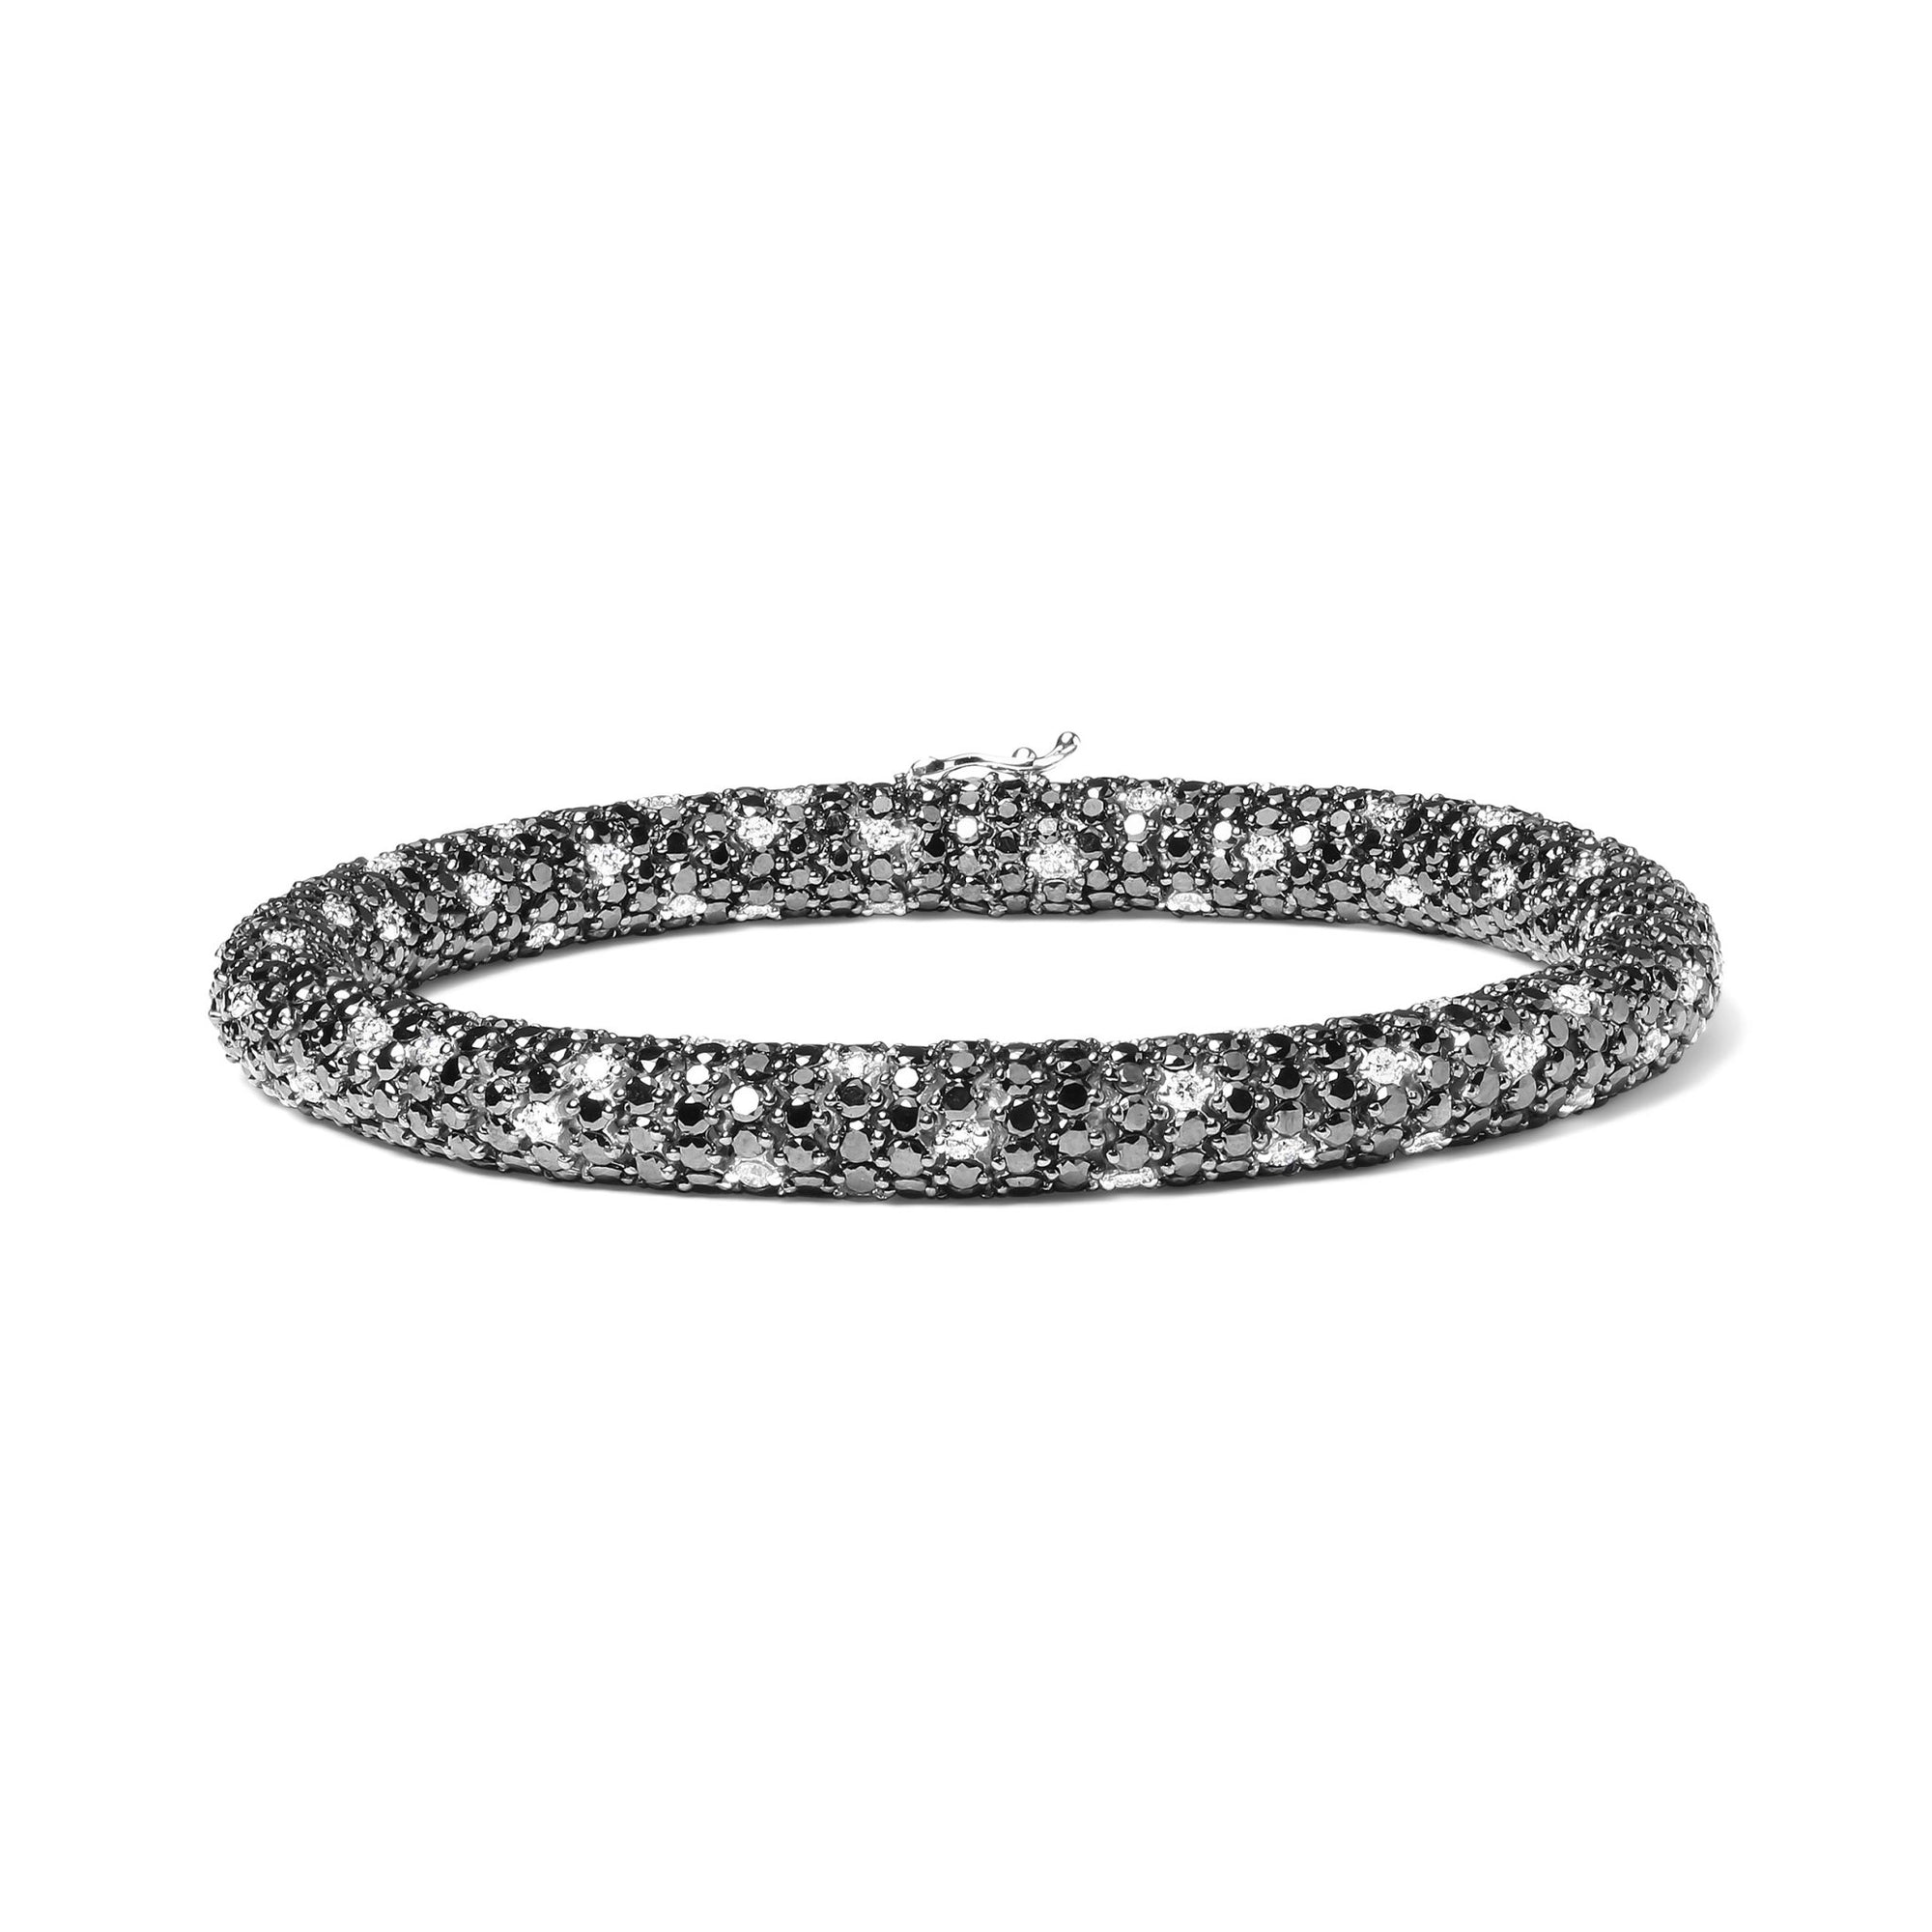 18K White Gold 20.0 Cttw Black and White Pave Set Diamond Eternity Snake Skin Style Tennis Bracelet (Black and G-H Color, SI1-SI2 Clarity) - Size 7" - LinkagejewelrydesignLinkagejewelrydesign